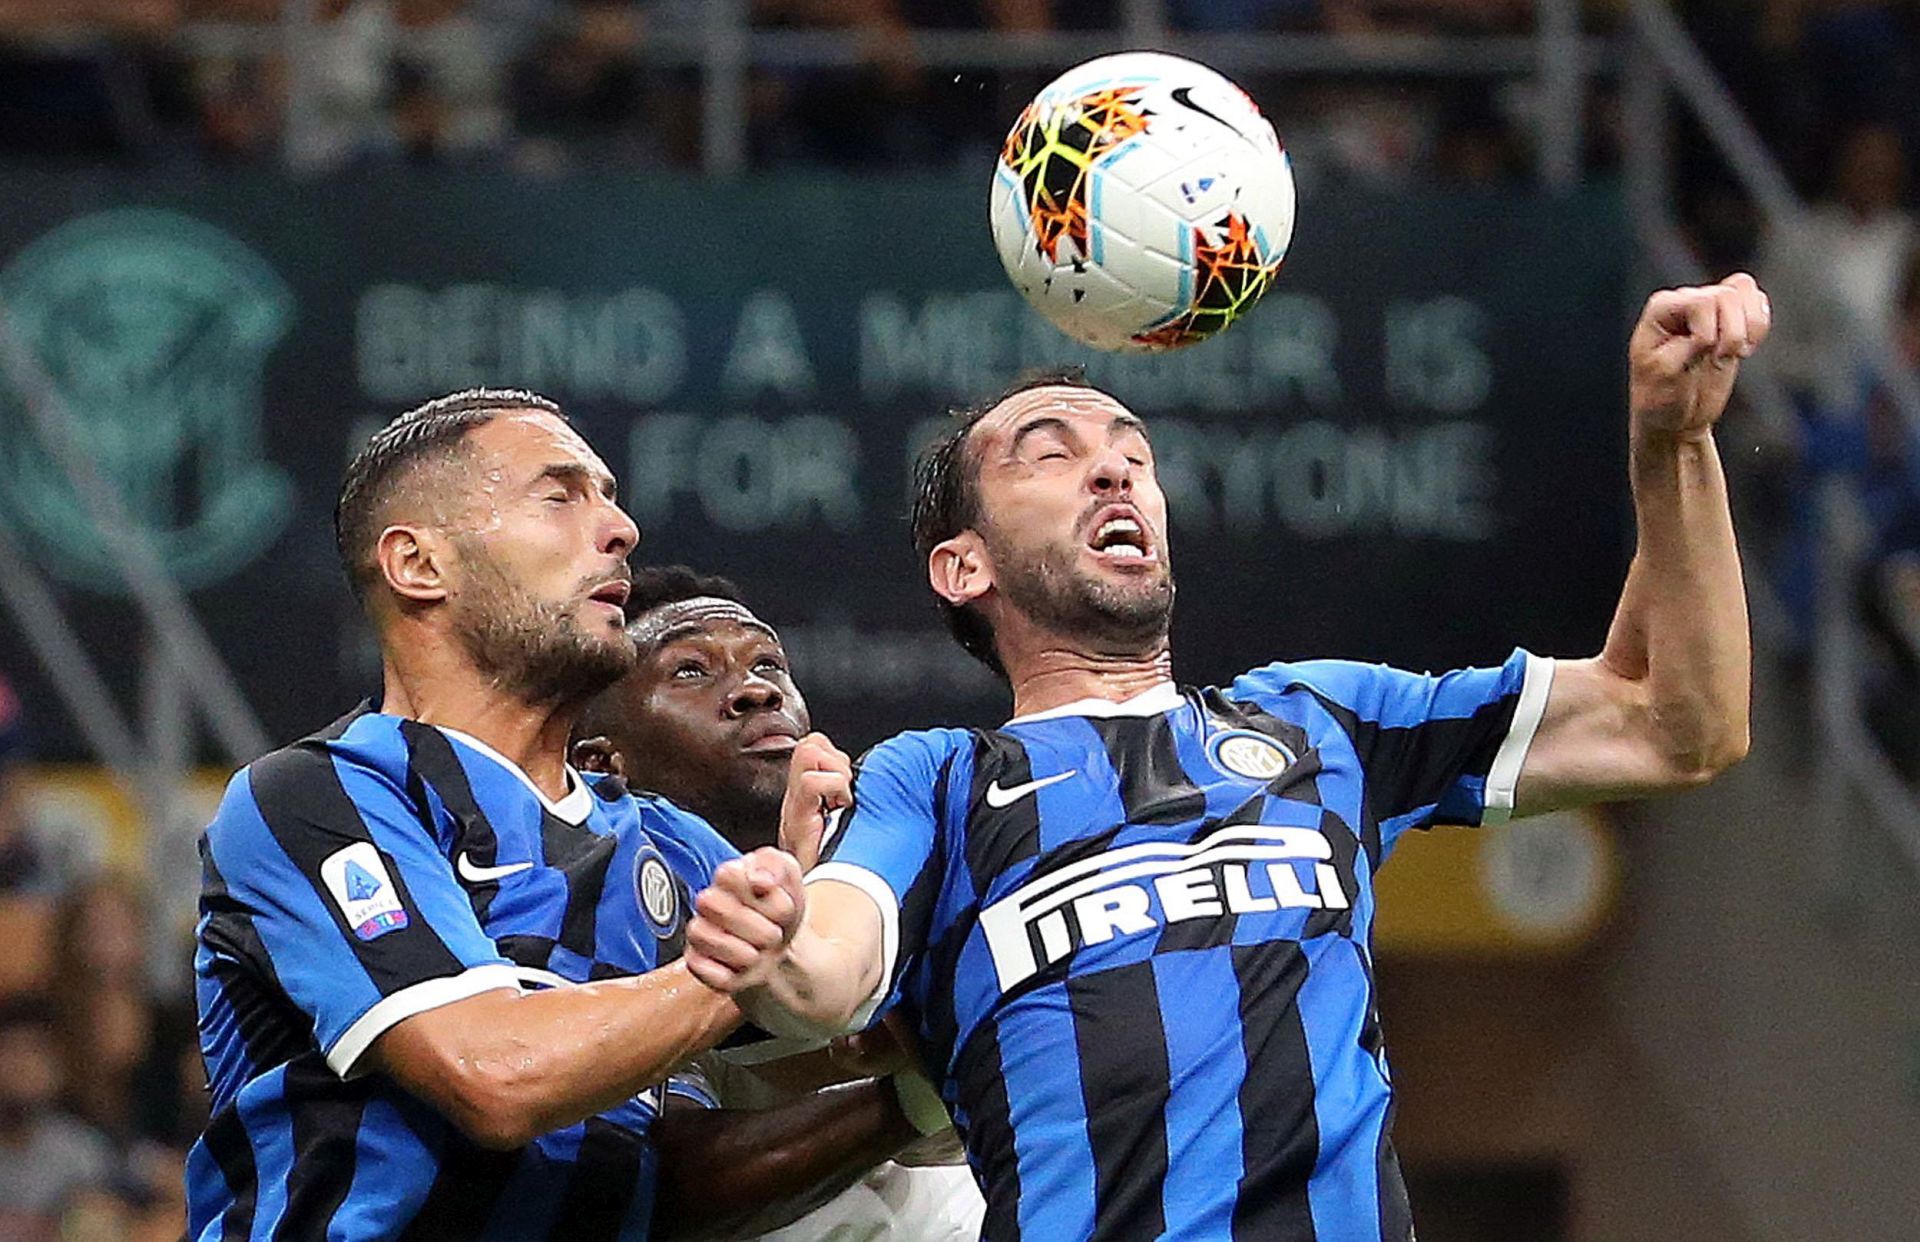 epa07869462 Lazio's Felipe Caicedo (C) jumps for the ball against Danilo DAmbrosio (L) and his teammate Diego Godin (R) of Inter during the Italian Serie A soccer match between FC Inter and SS Lazio at Giuseppe Meazza stadium in Milan, Italy, 25 September 2019.  EPA/MATTEO BAZZI